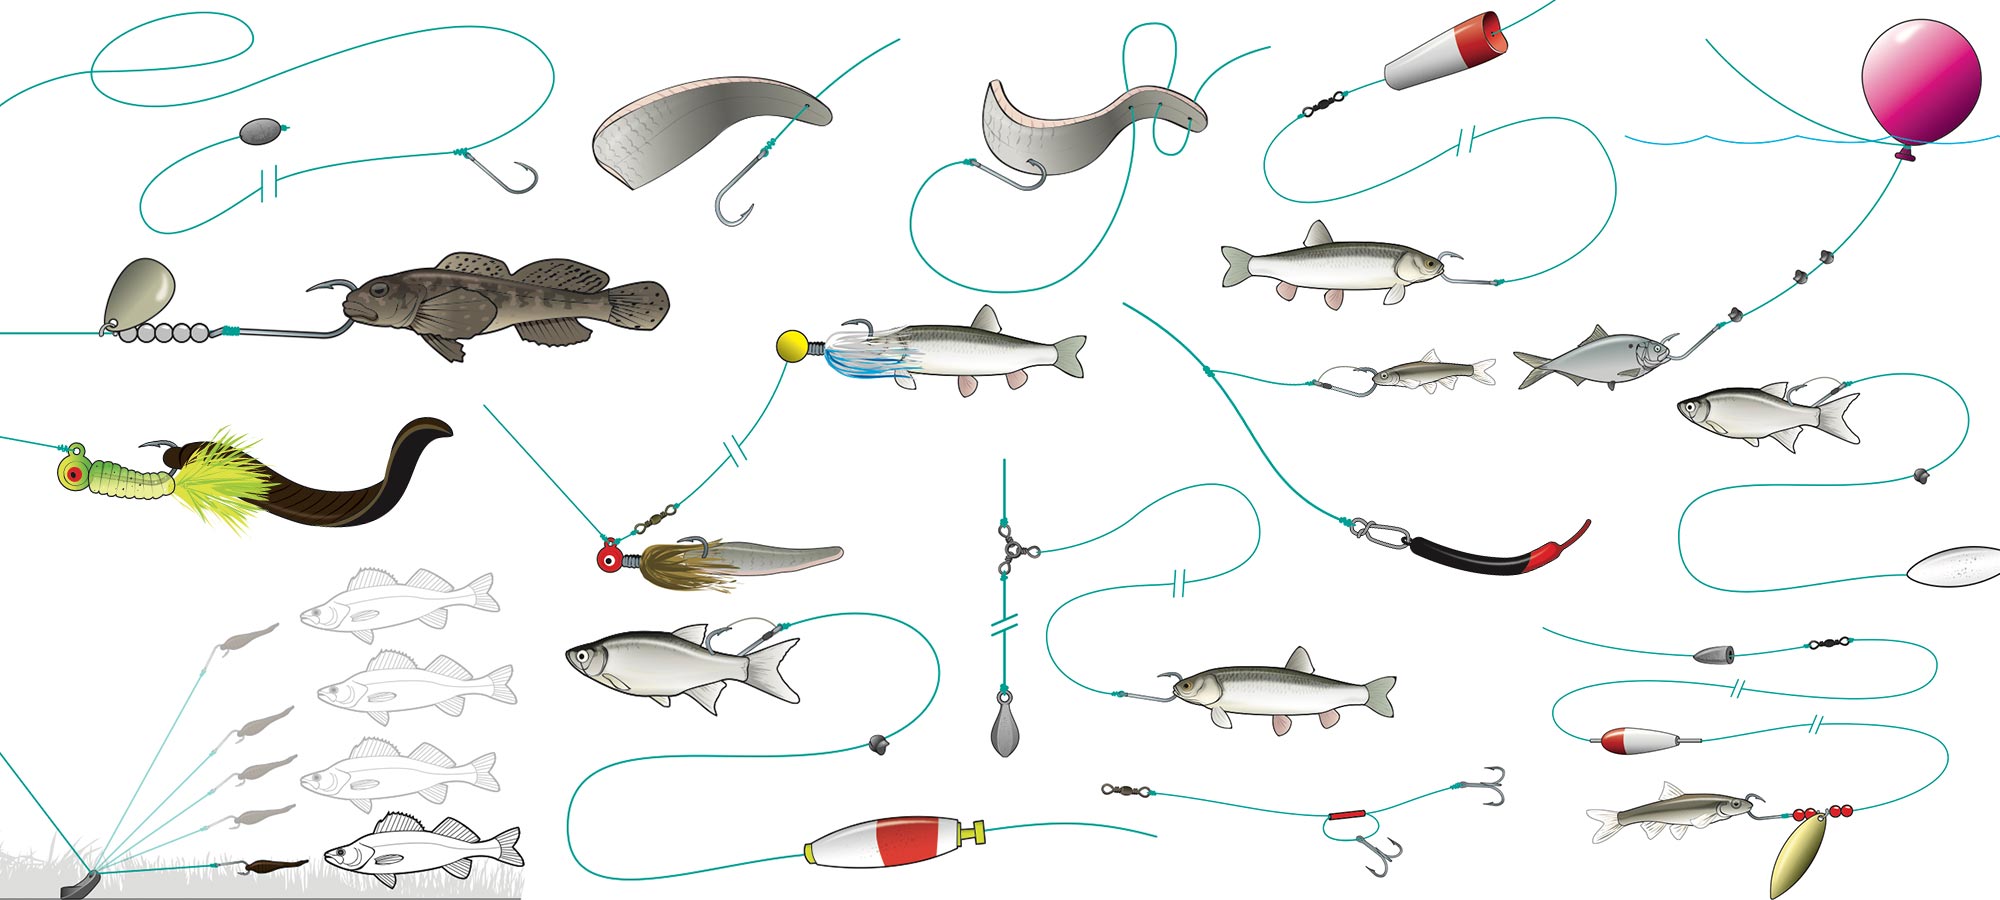 A hook set rod to up sinker fishing and How to